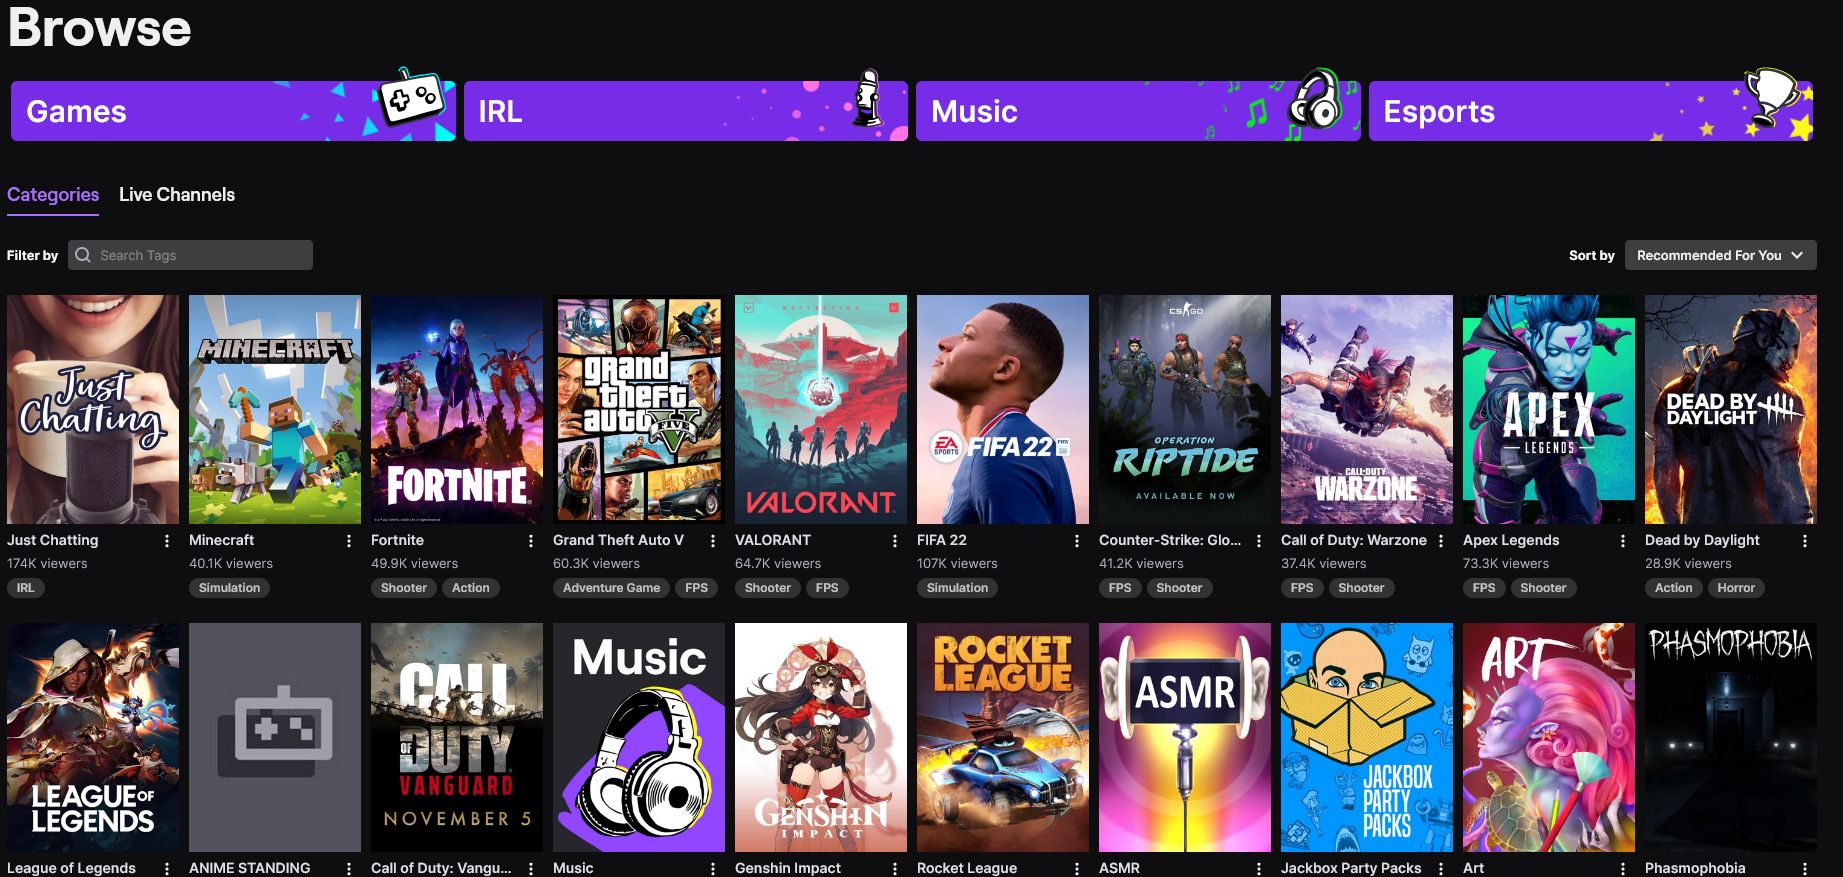 twitch categories and games